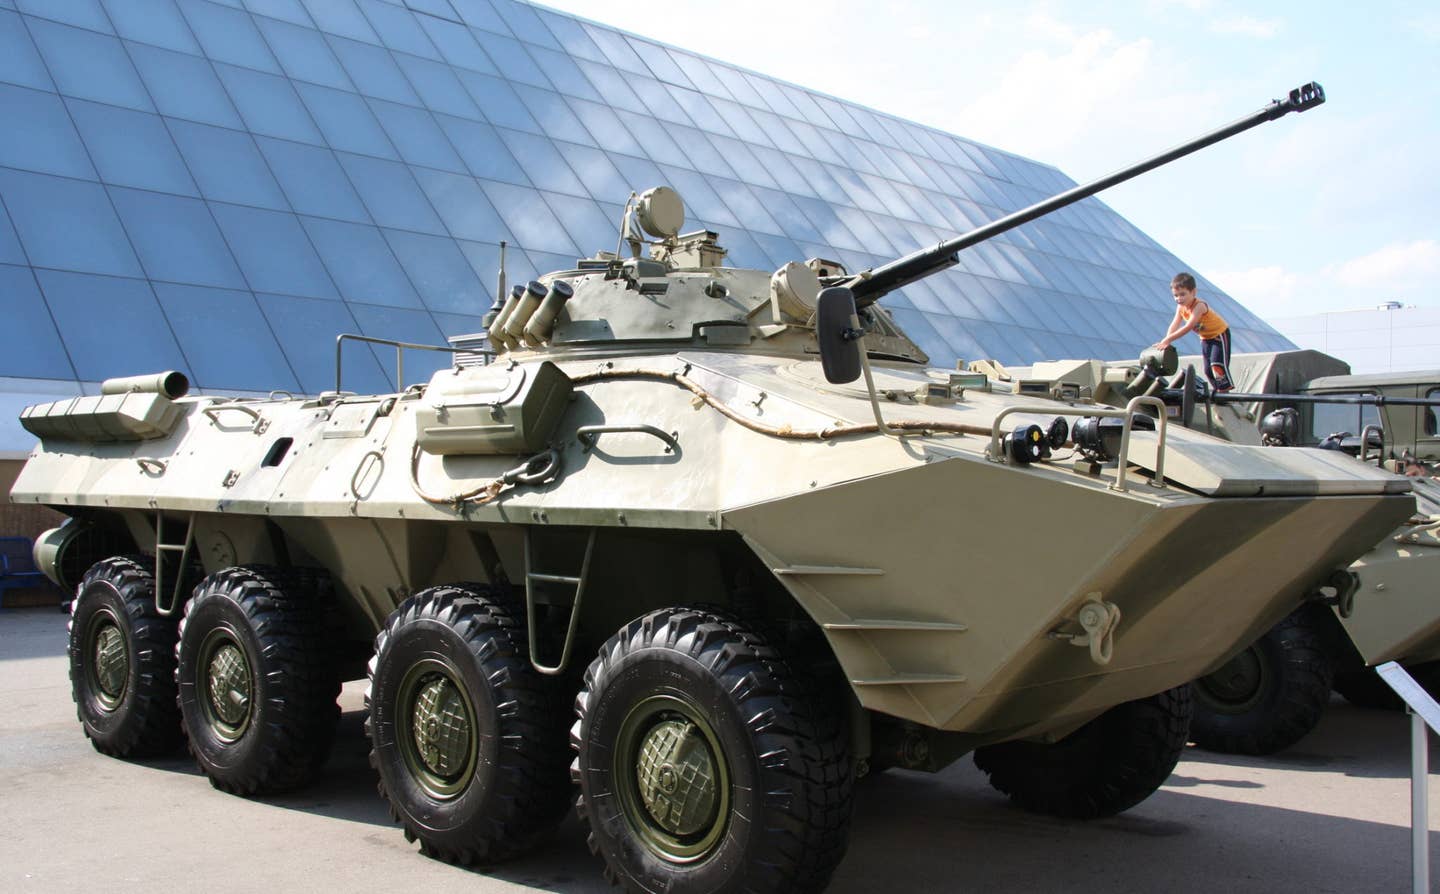 The ultimate version of the BTR, the BTR-90. (Image from Wikimedia Commons)